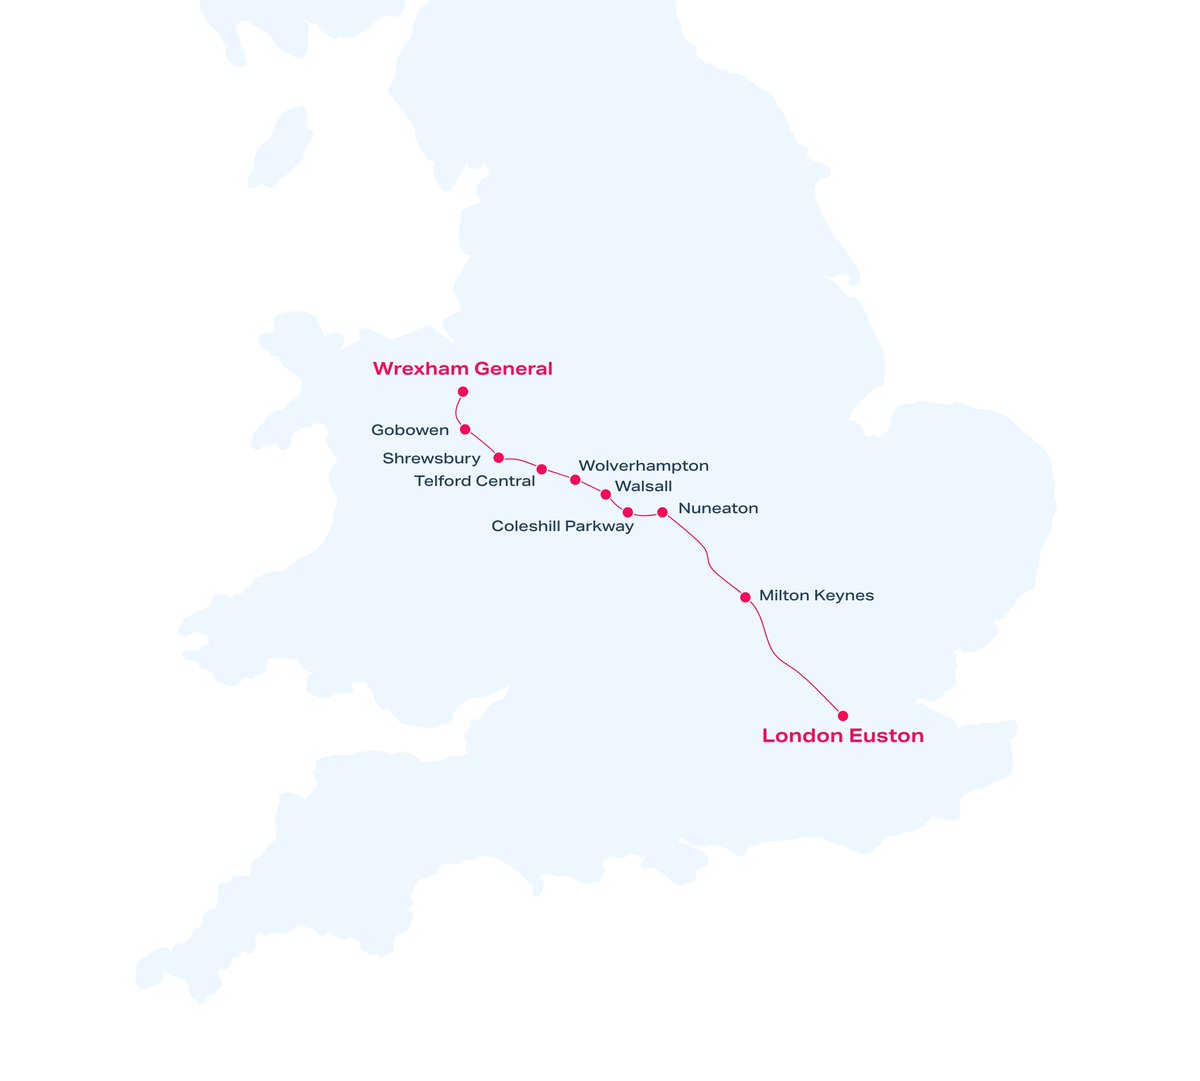 We're excited to share with you the route map for our proposed passenger train service we'll be running in partnership with @SLCRail. Our open access Wrexham-London service will begin operating in 2025. Read more: alstom.com/press-releases…